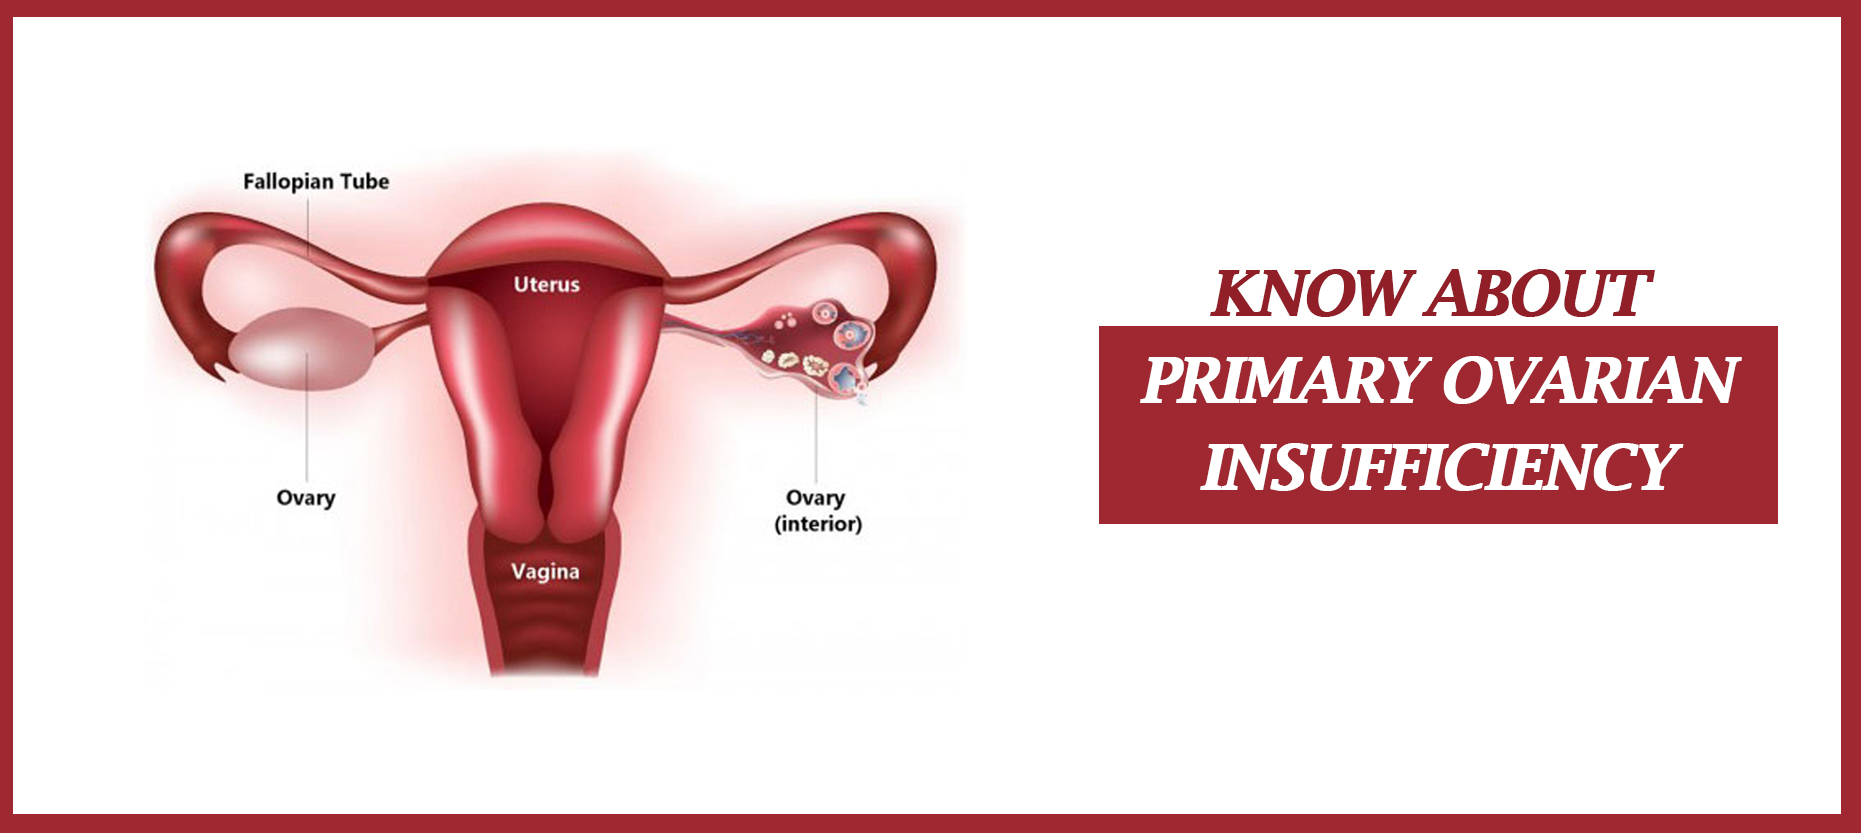 Primary Ovarian Insufficiency: Causes, Symptoms, and Management